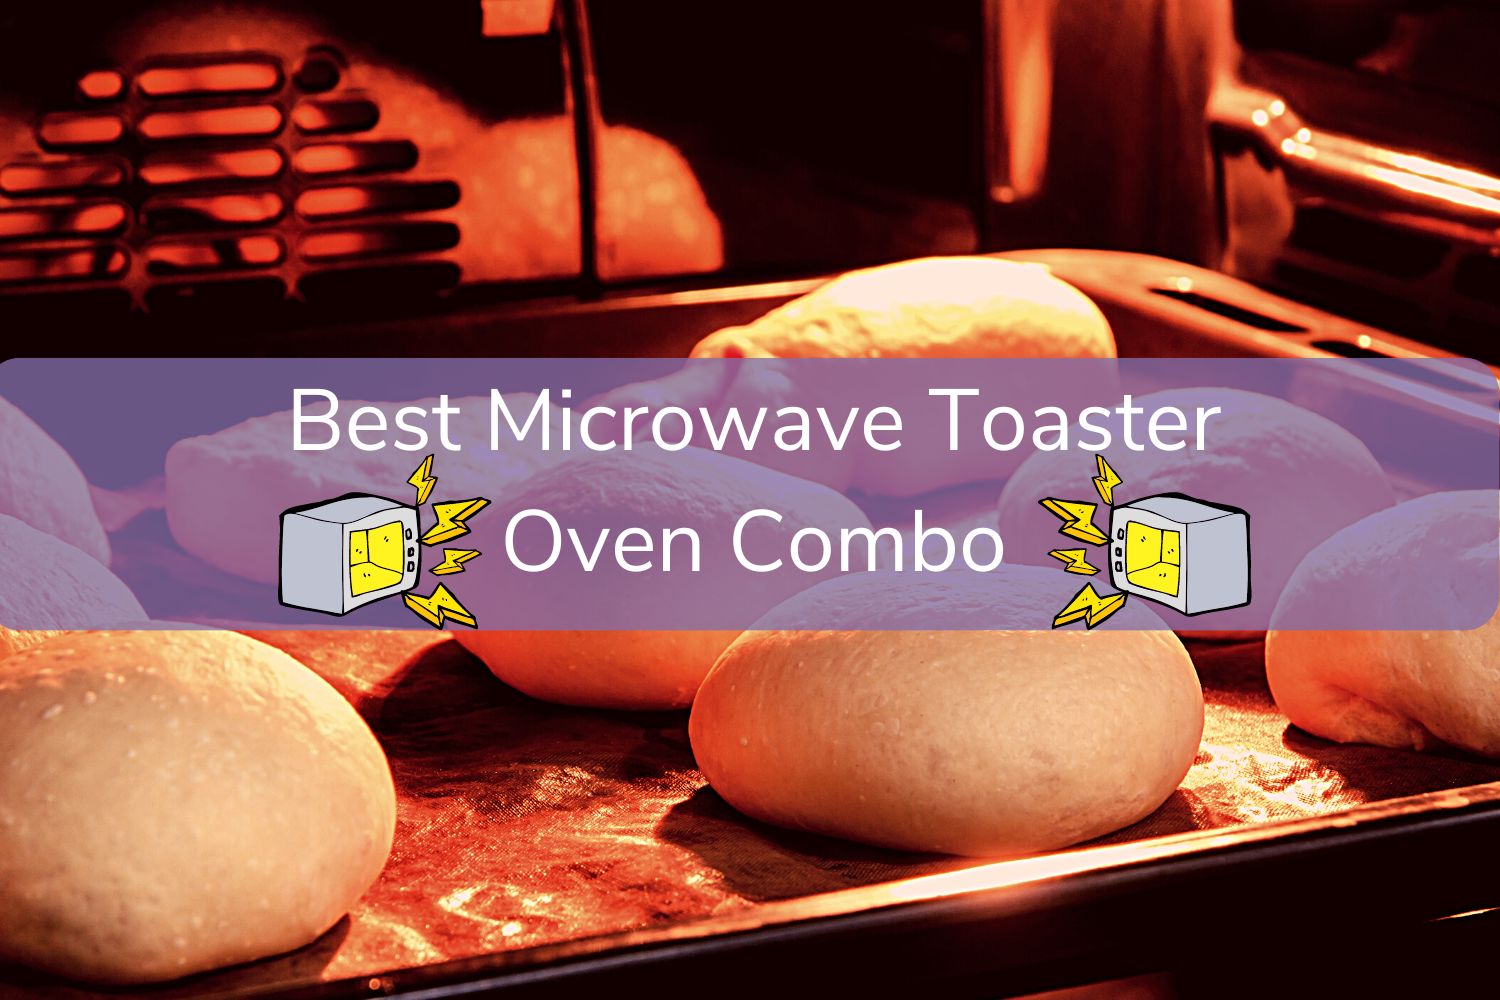 https://clankitchen.com/wp-content/uploads/2022/10/microwave-toaster-oven-combo-1.jpg